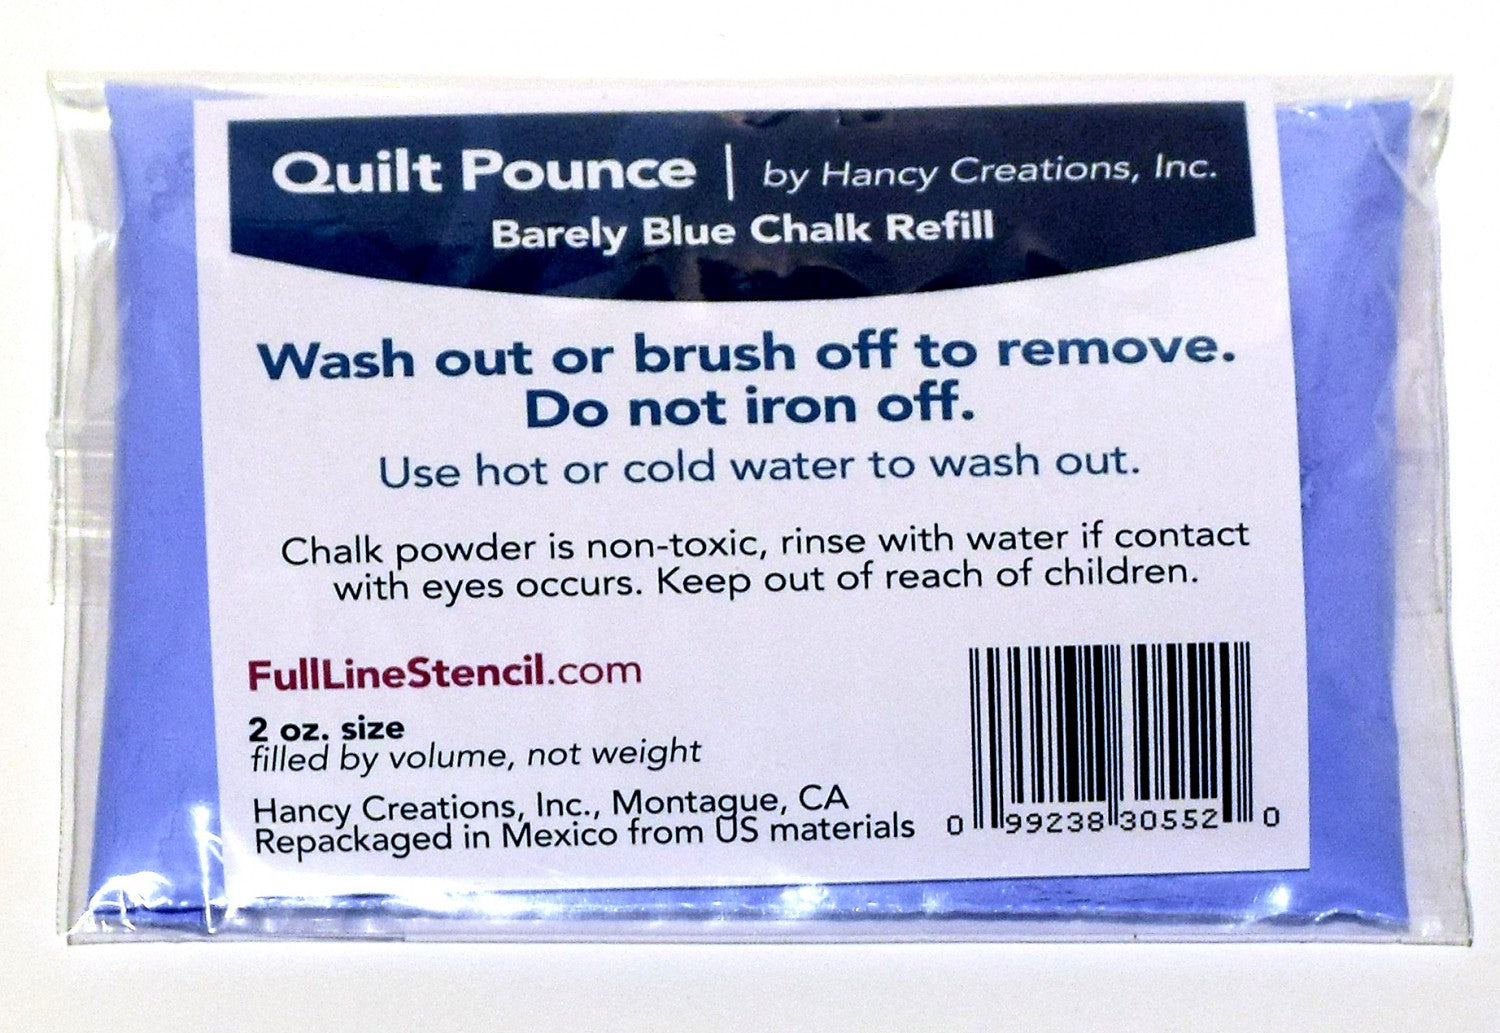 Quilt Pounce Barely Blue Chalk Refill